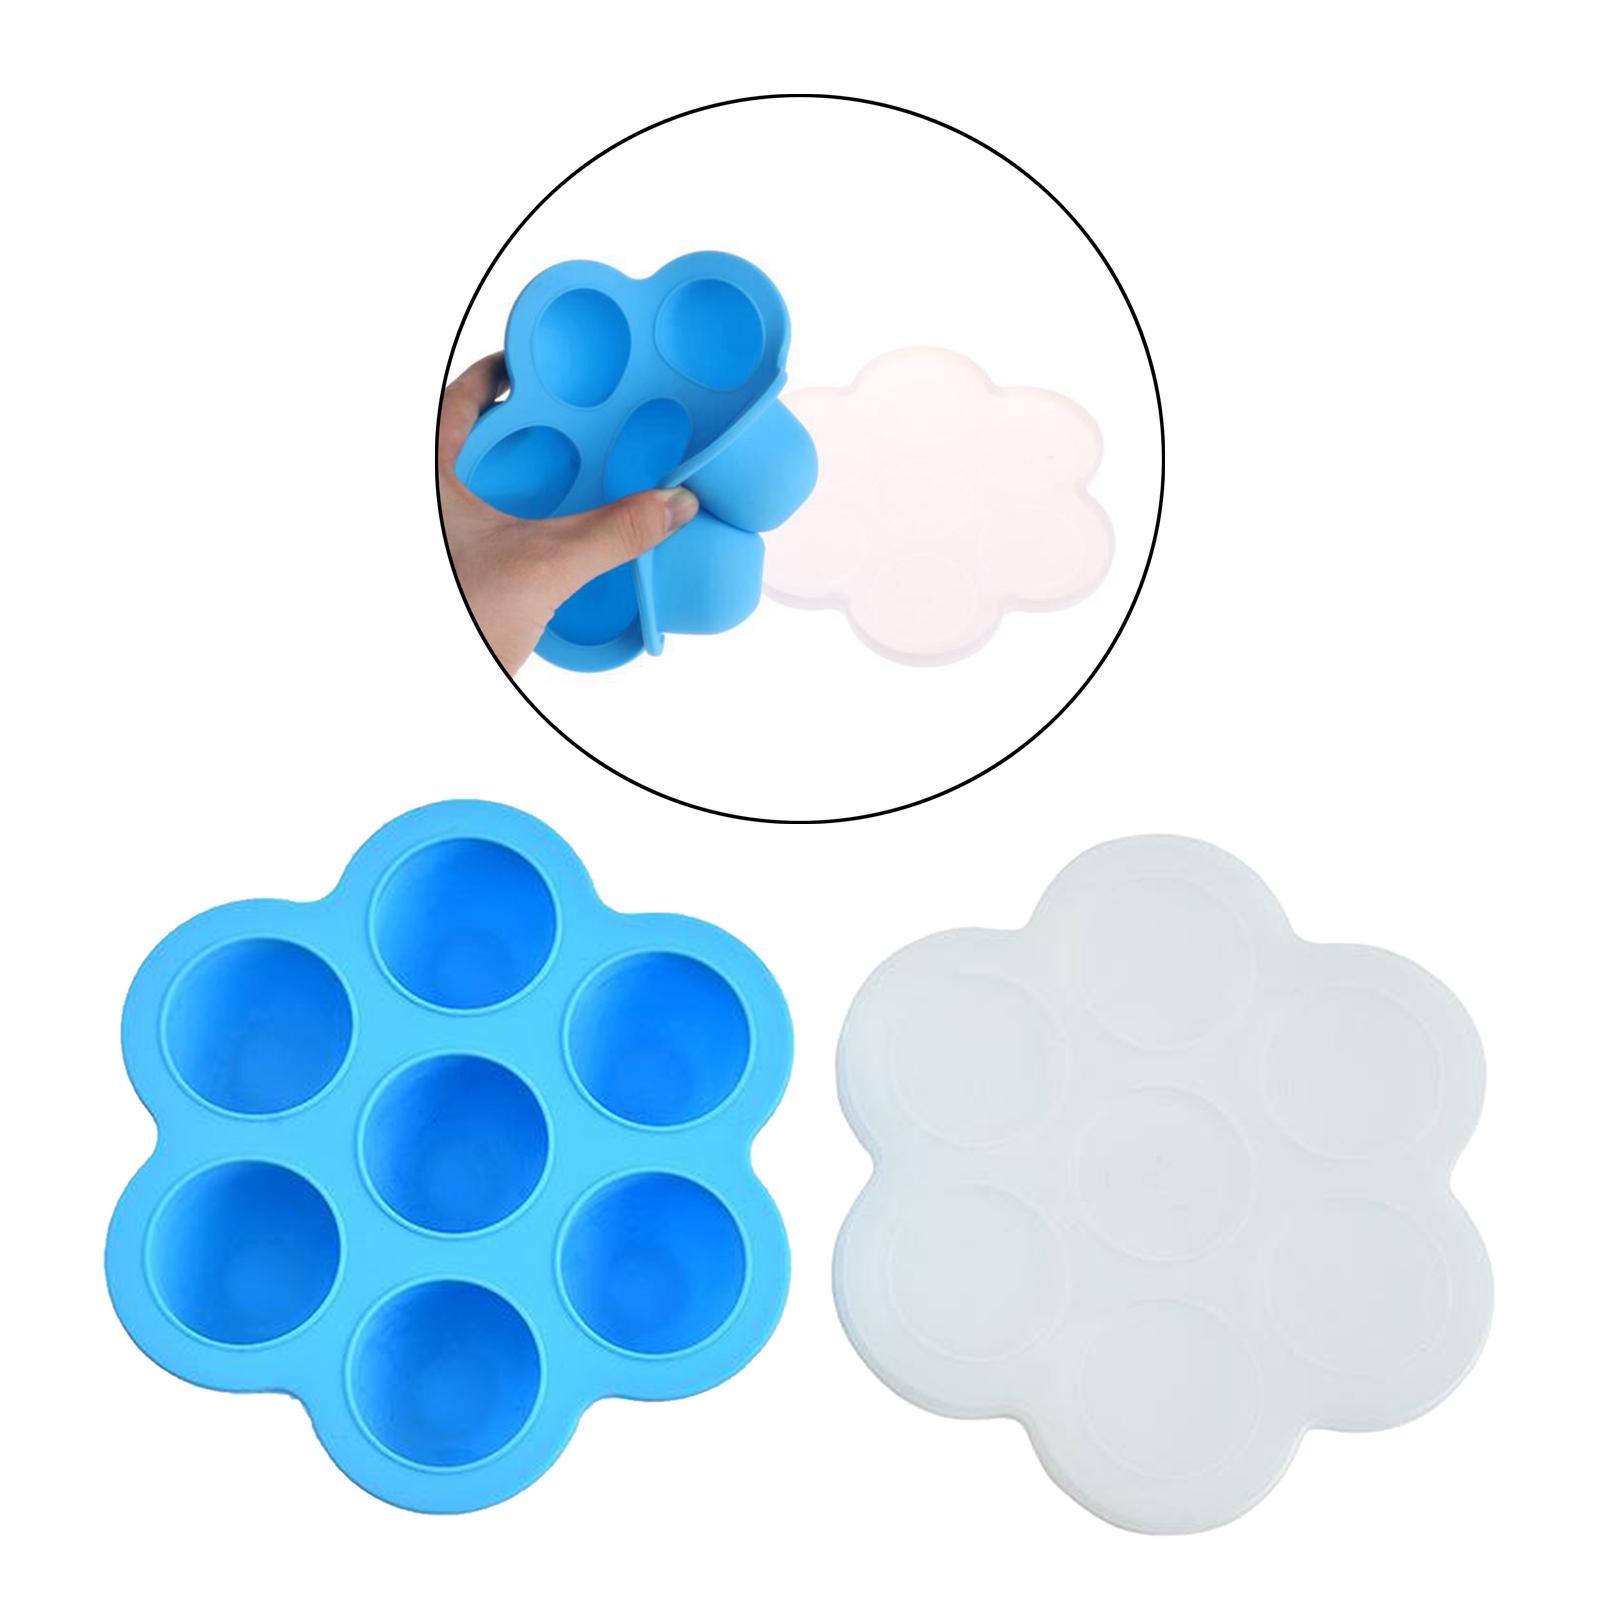 Silicone Infant Breast Milk Freezer Tray Weaning 7 Grids w/ Lid Crisper Ice Mould for Vegetable & Fruit Purees